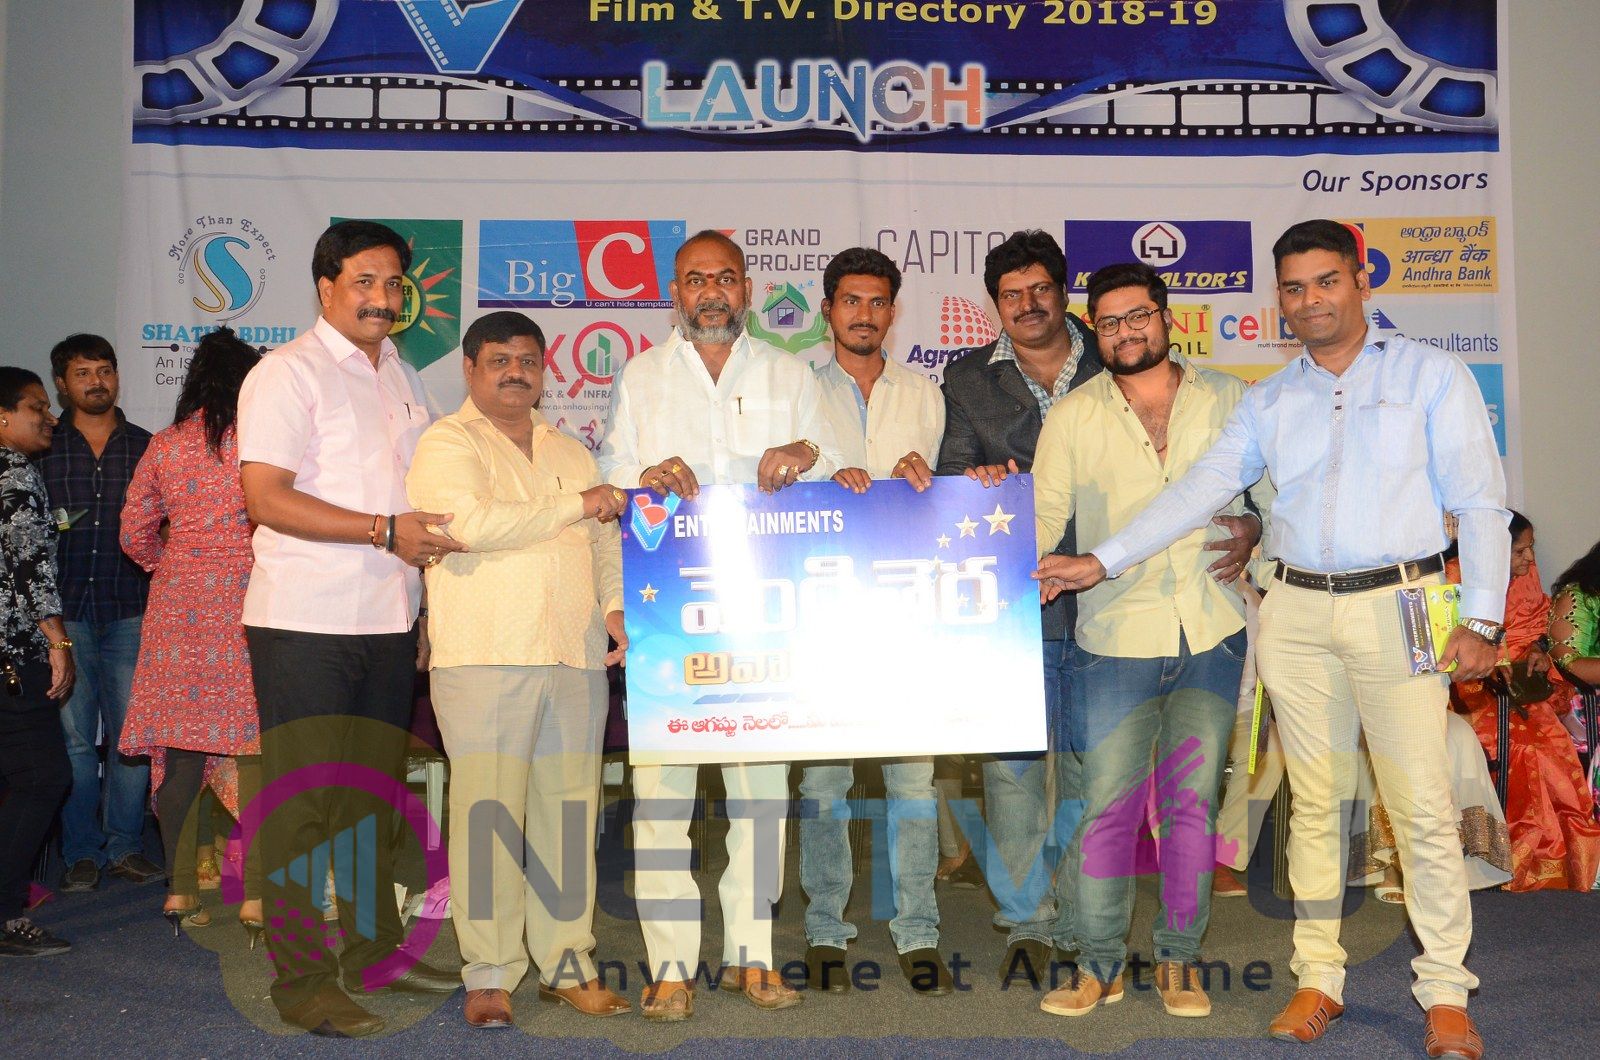  Film And TV Directory Event Pics  Telugu Gallery